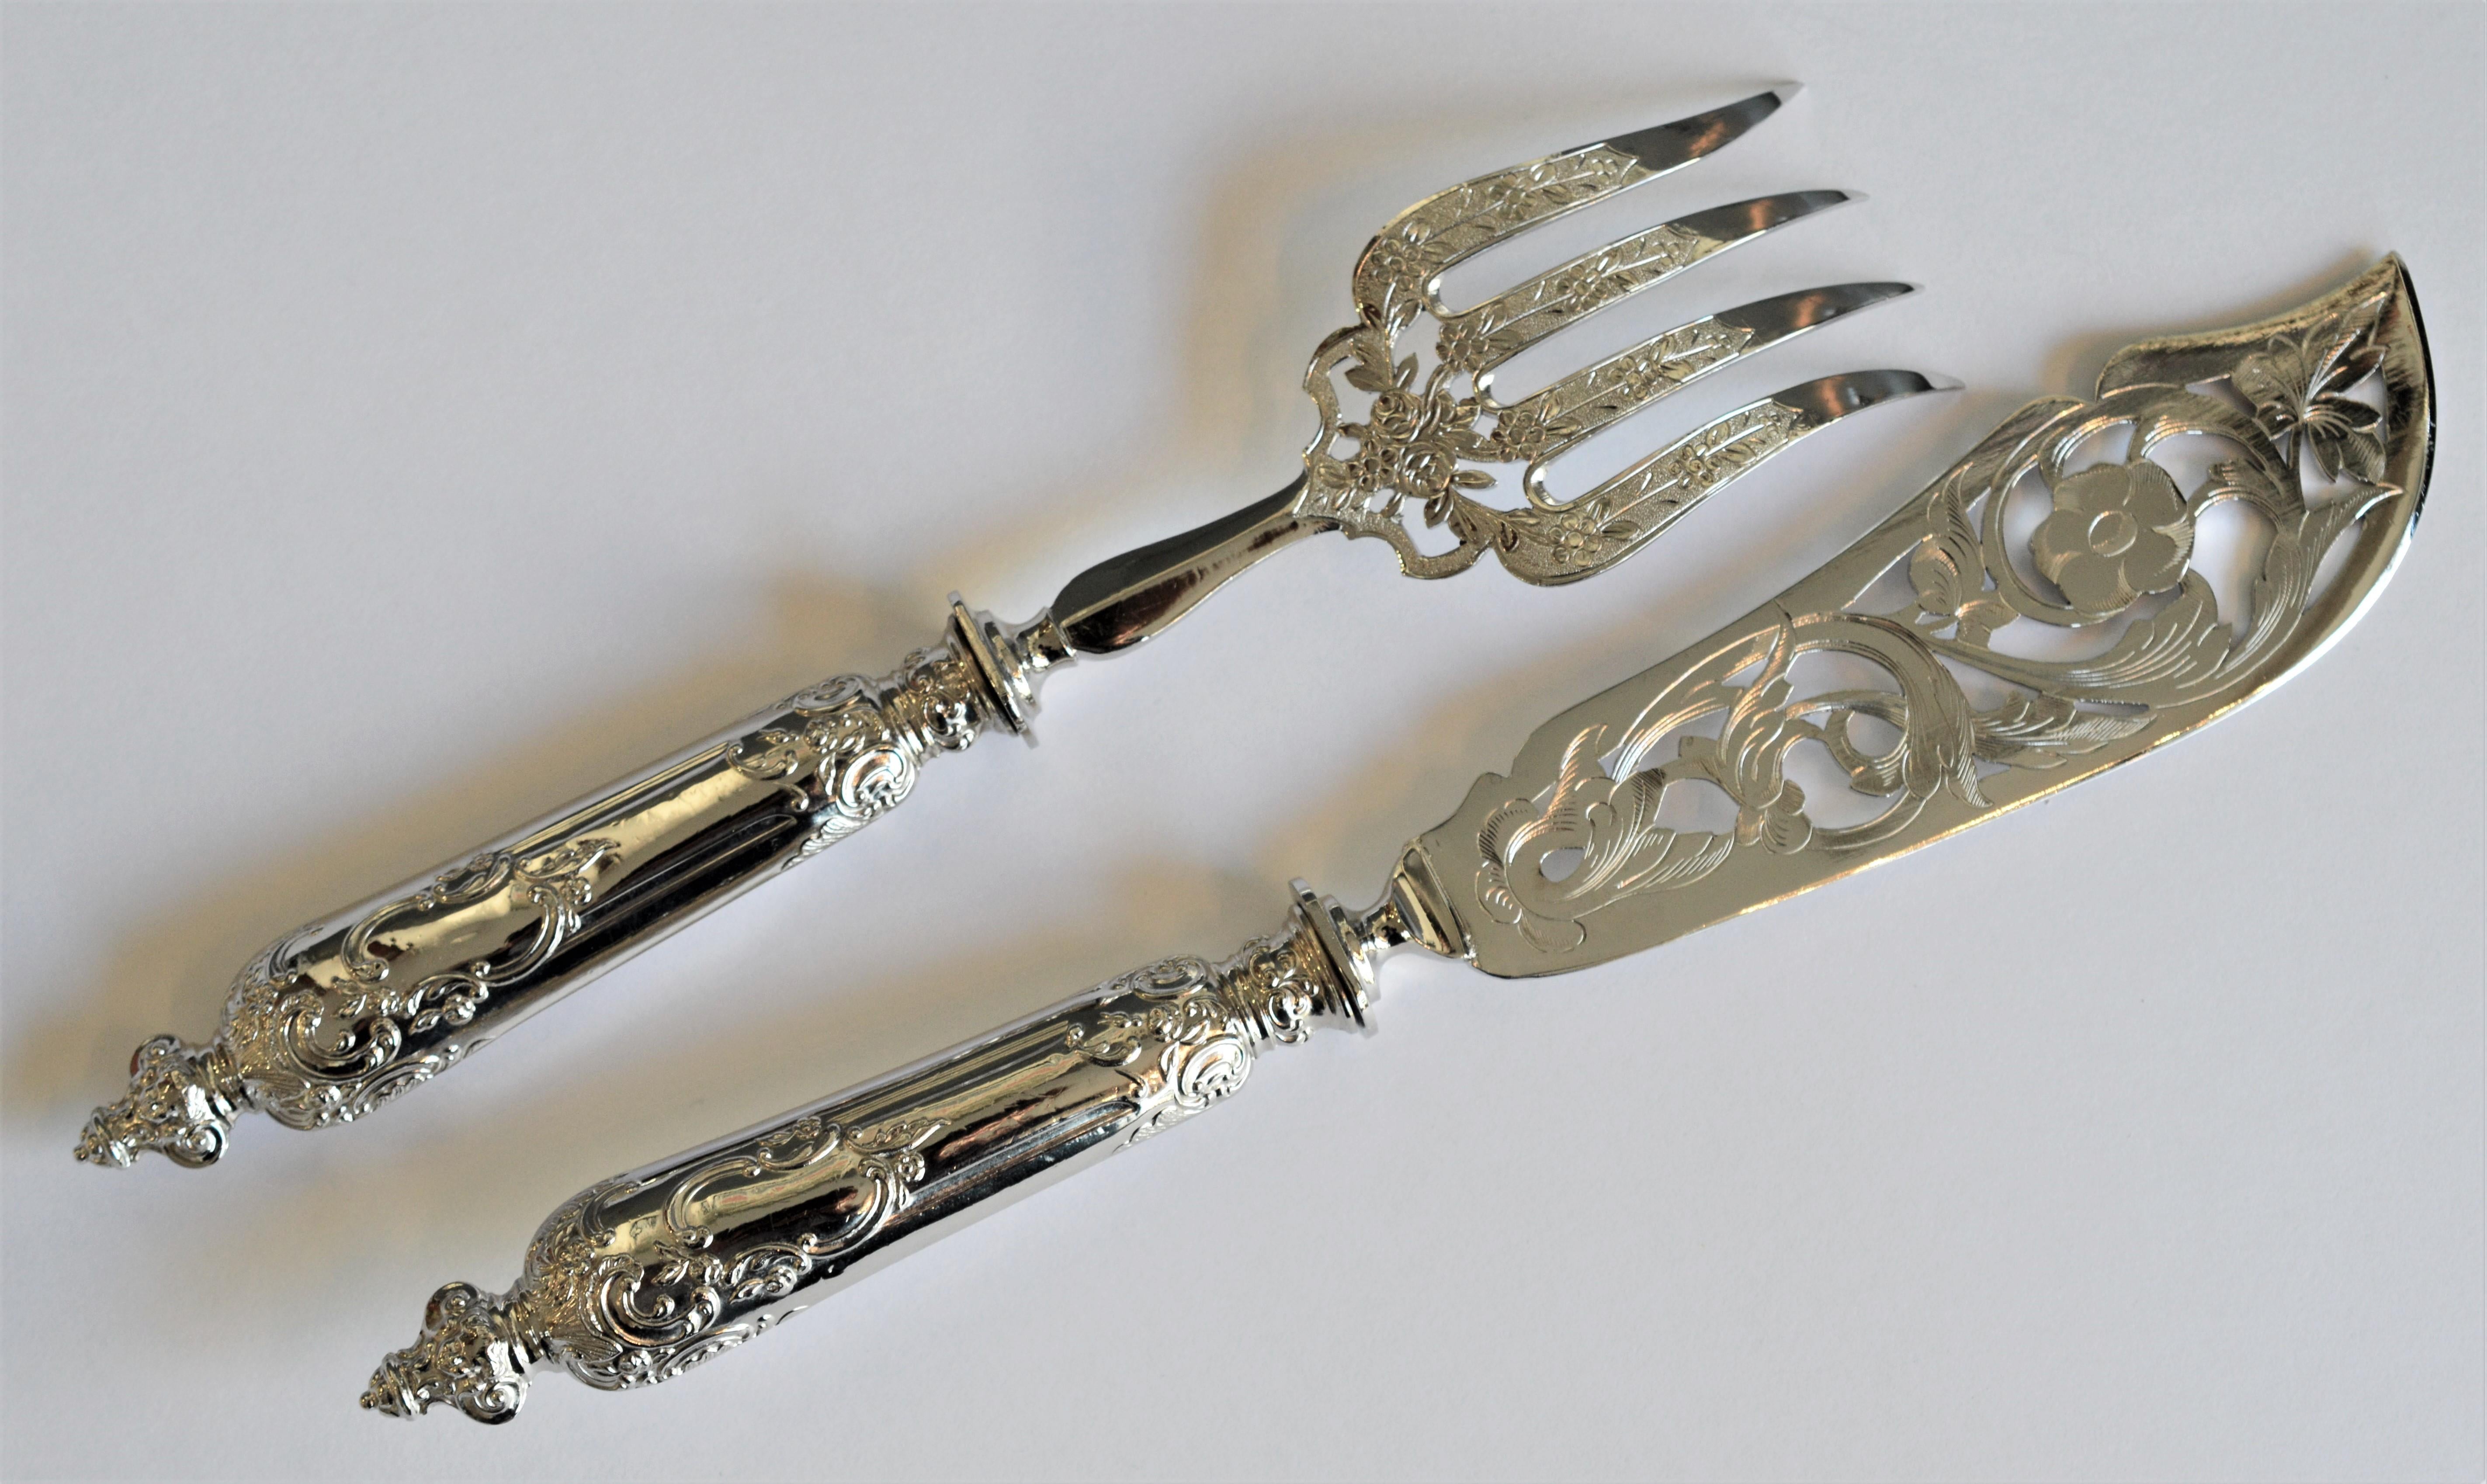 Notable floral inspired engraving compliments this ornate fish knife and fork duo. The pair, with high luster silver plated finish and fancy filigree pattern delivers an elegant table presentation.
The fish knife measures approximately 12-1/4 inches